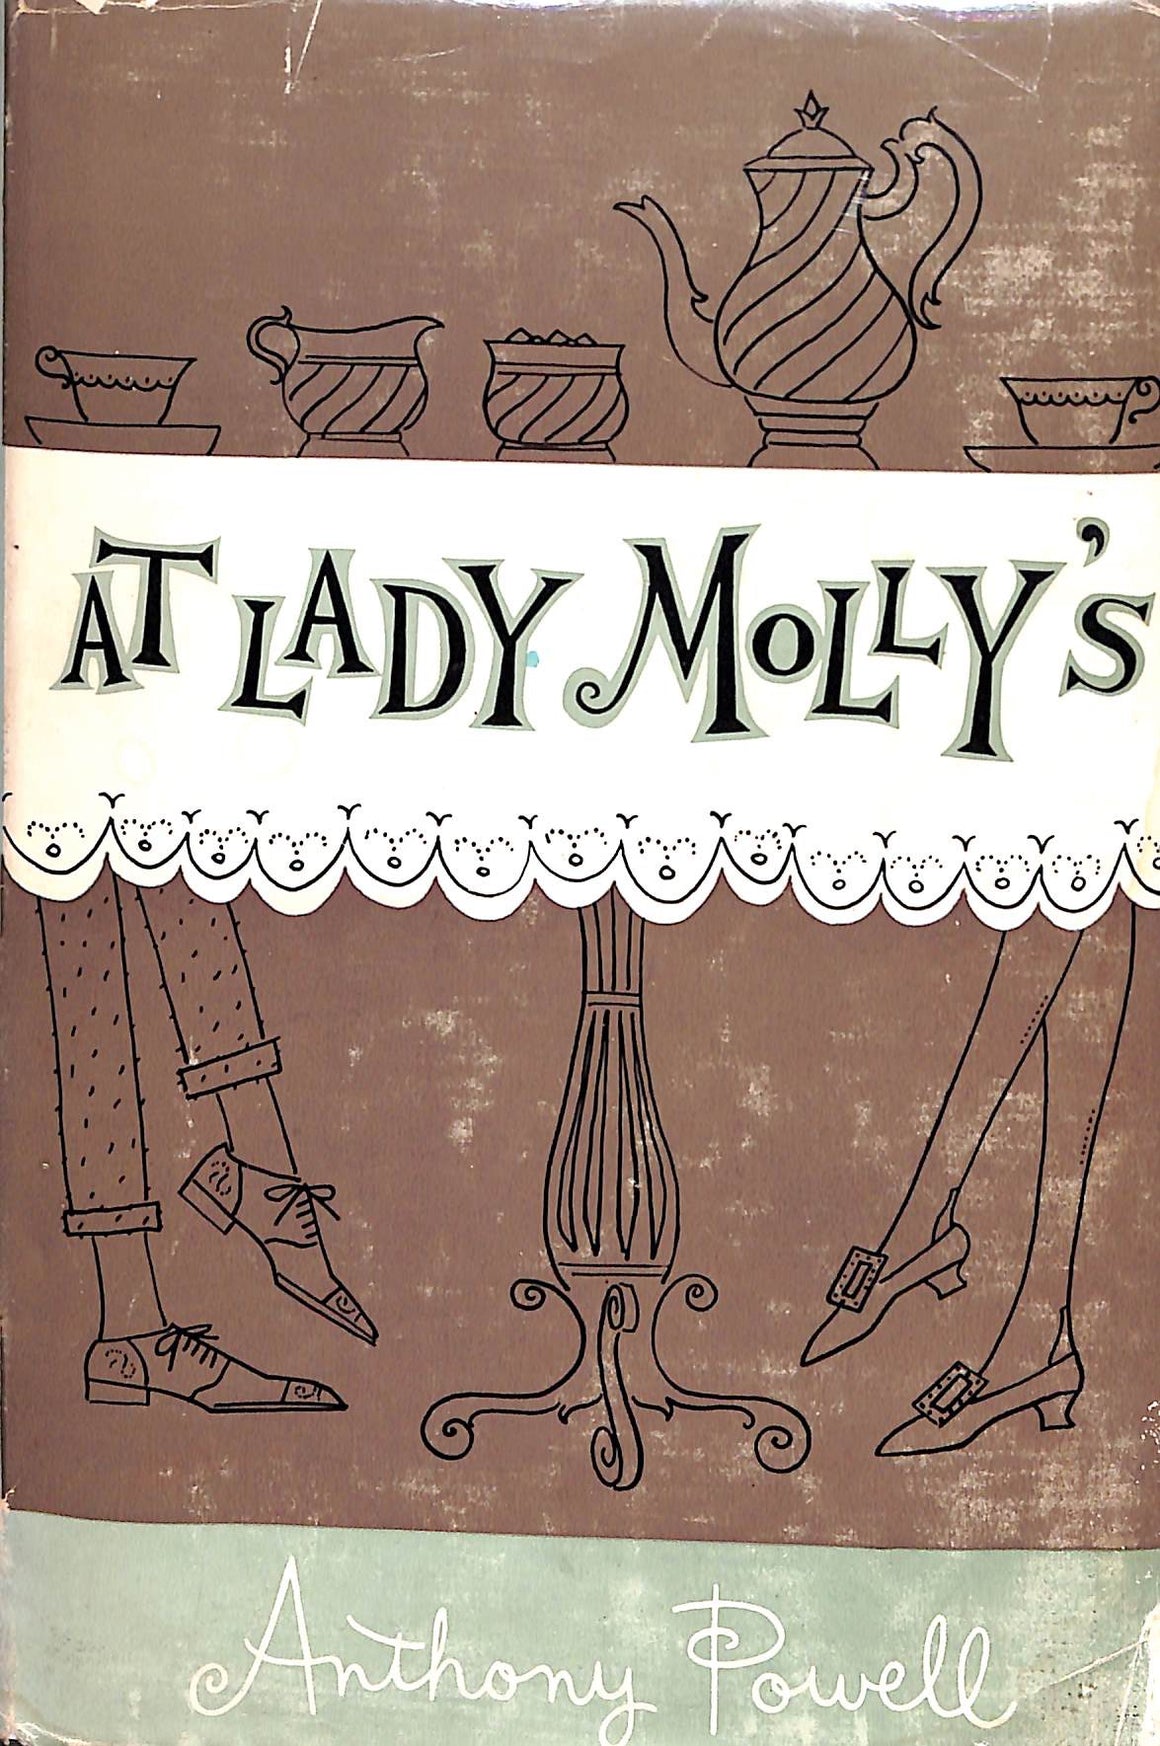 At Lady Molly's by Anthony Powell